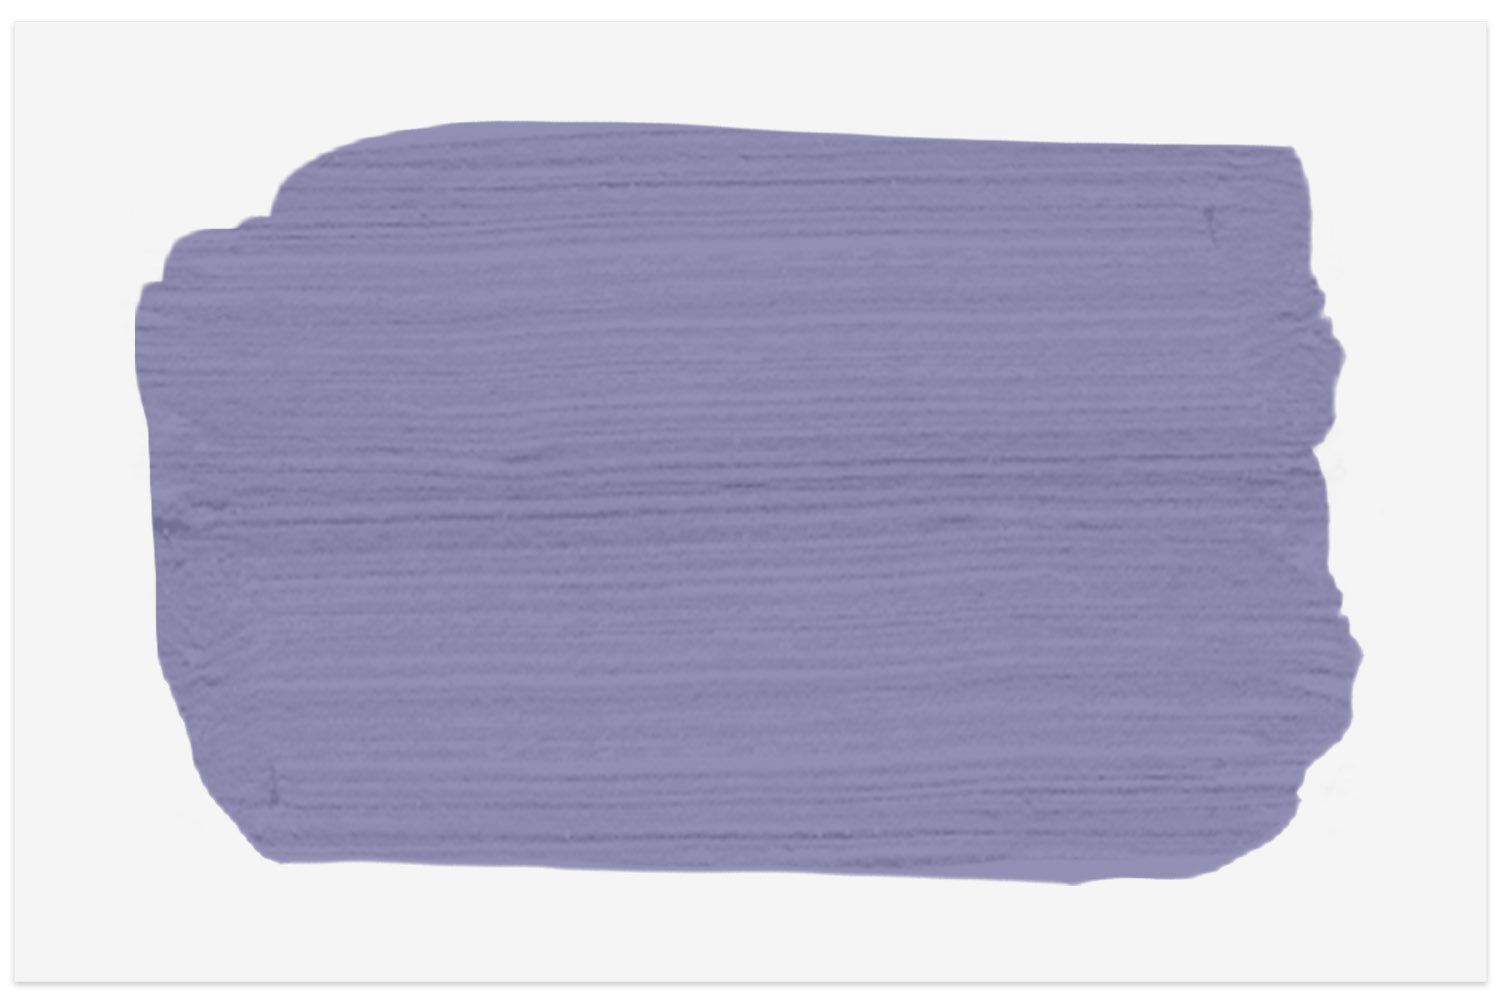 Olympic Paints French Violet paint swatch for lavender-inspired